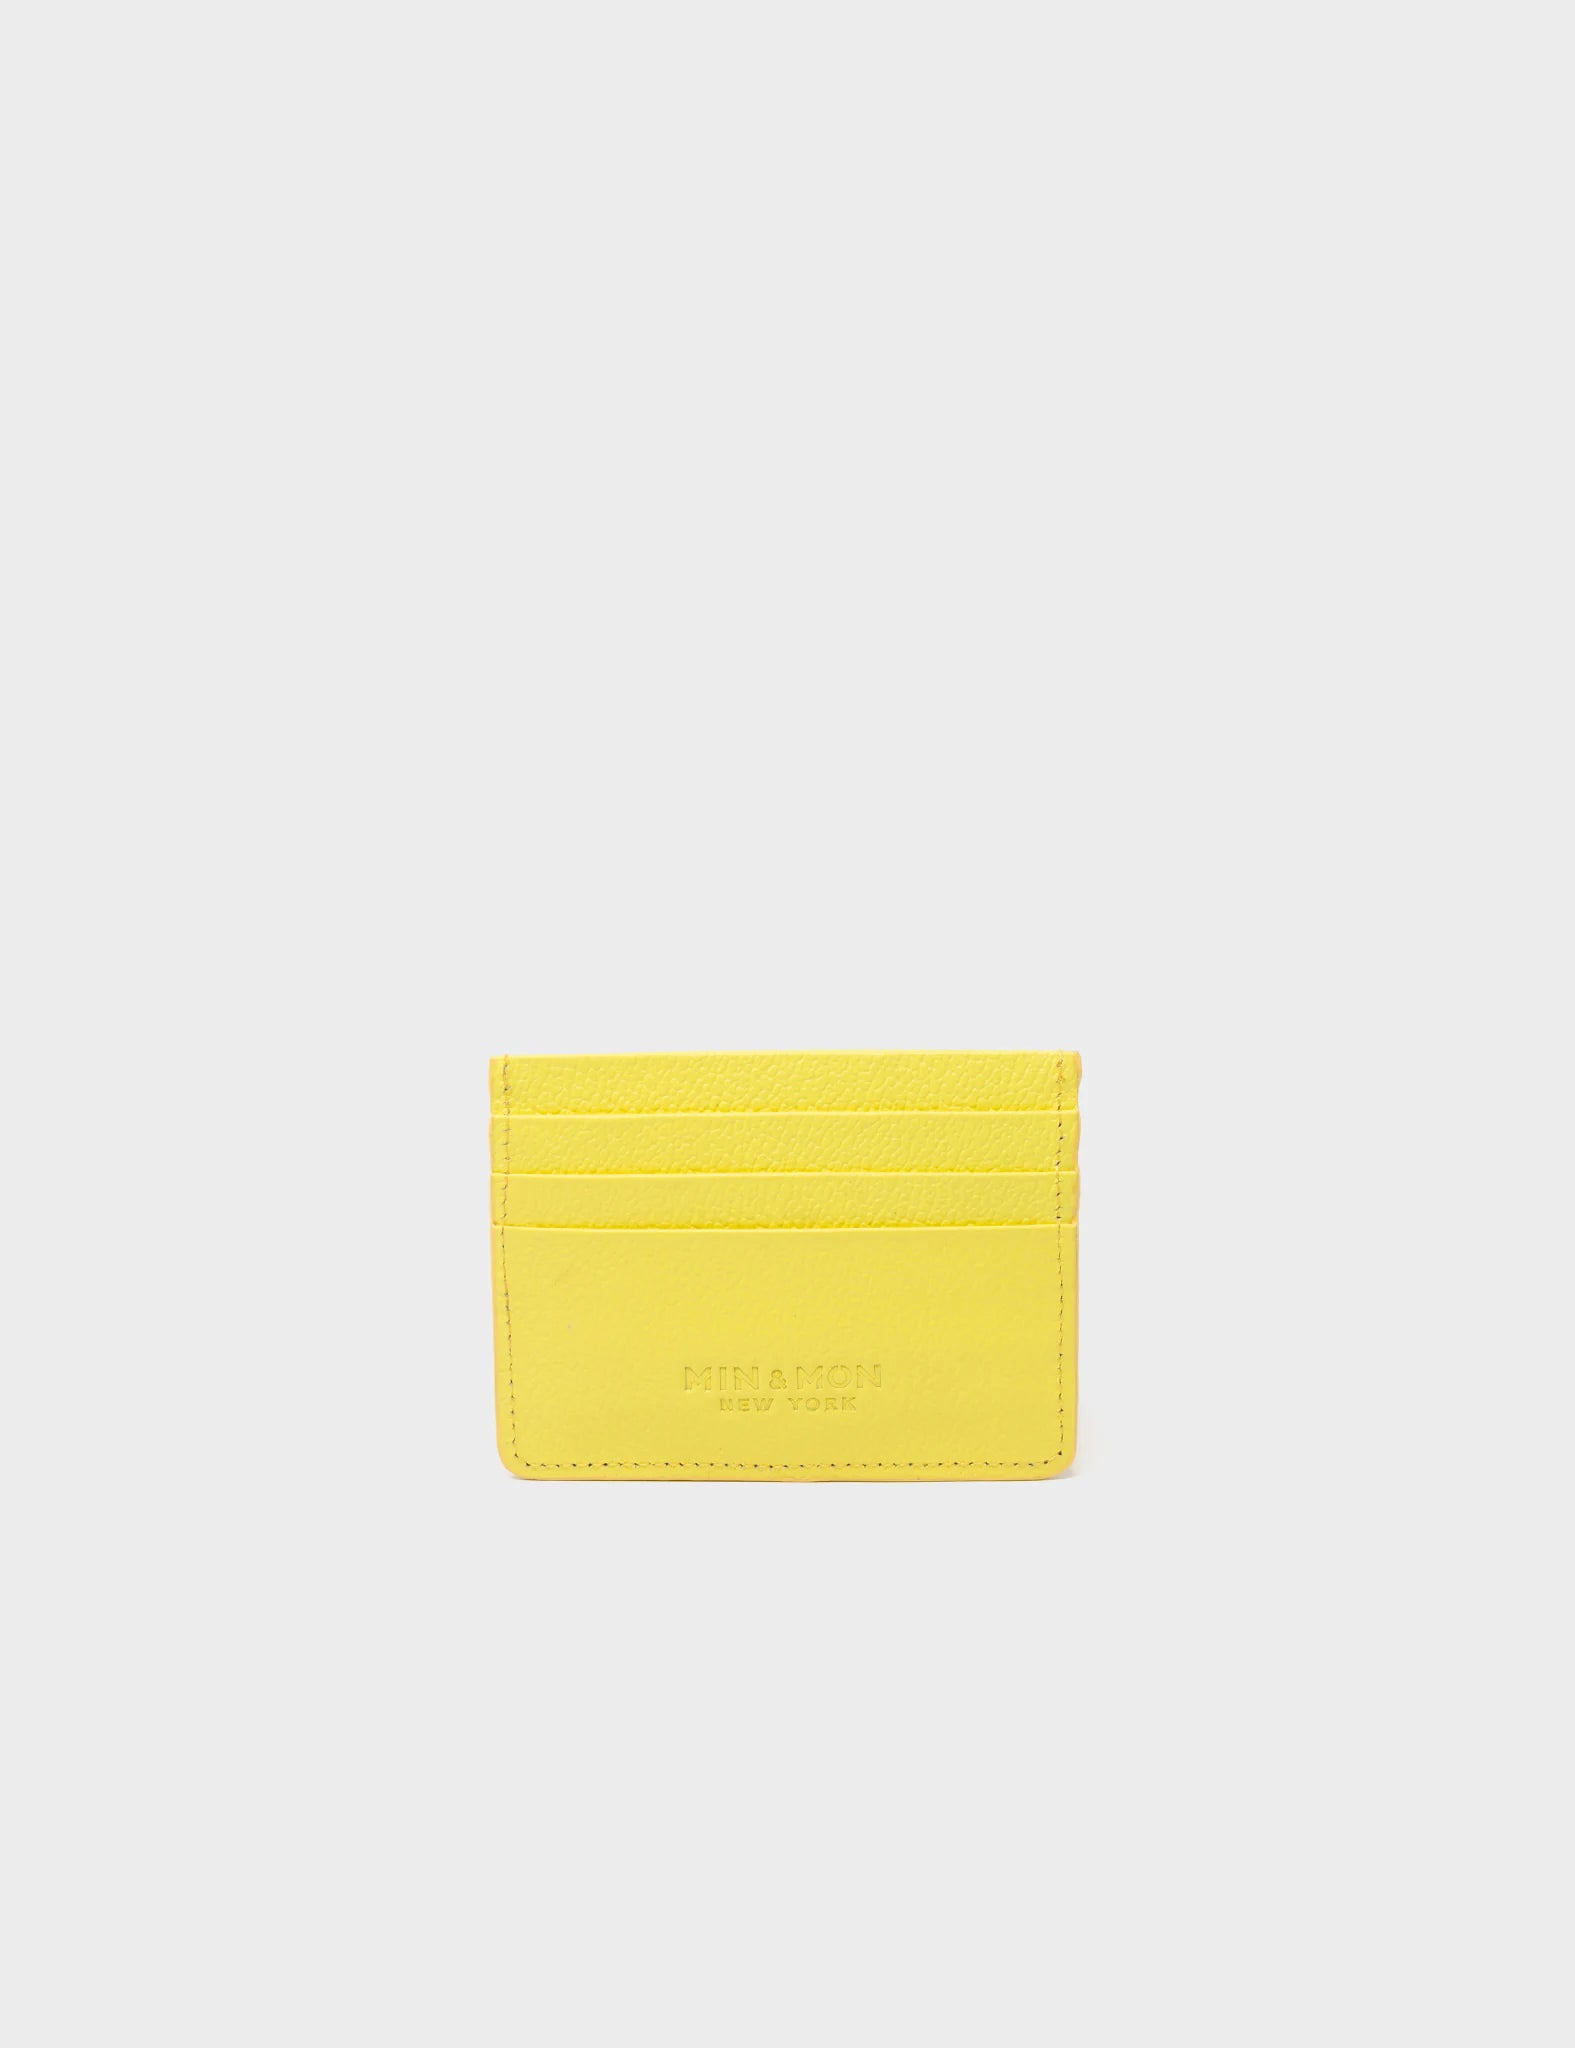 Filium Light Yellow Leather Cardholder - All Over Eyes Embroidery - Back View